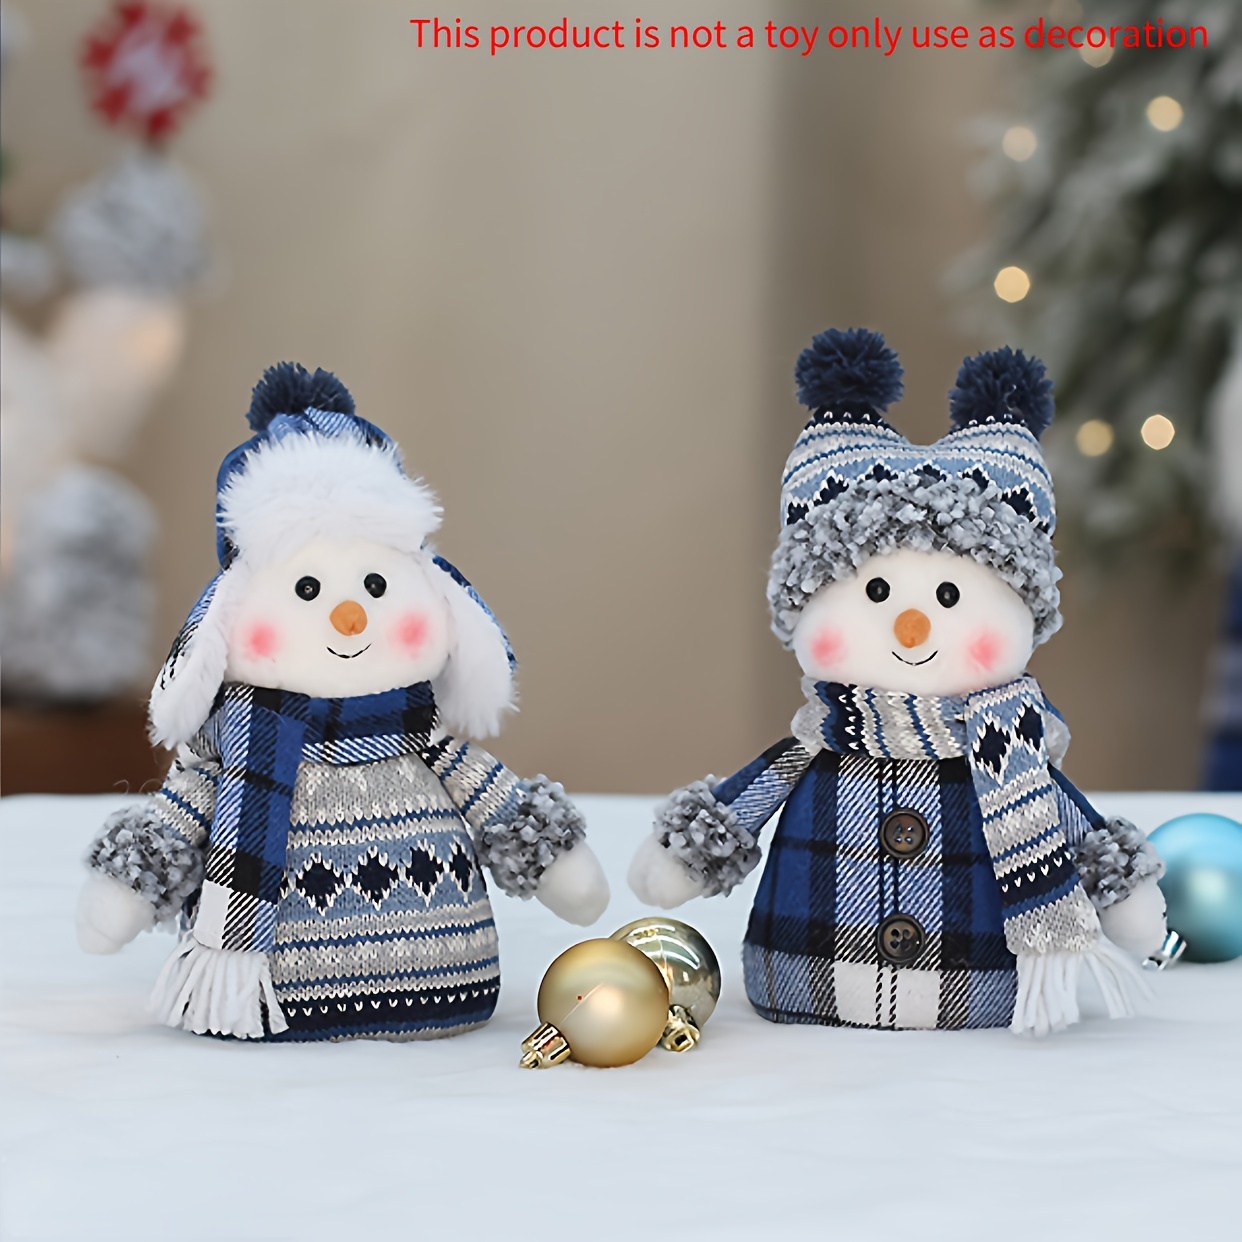 

Charming Blue Fabric Snowman Figurine - Perfect For Christmas Tree, Window Display & Home Decor | Ideal Holiday Gift For Living Room, Bedroom, Dining Area